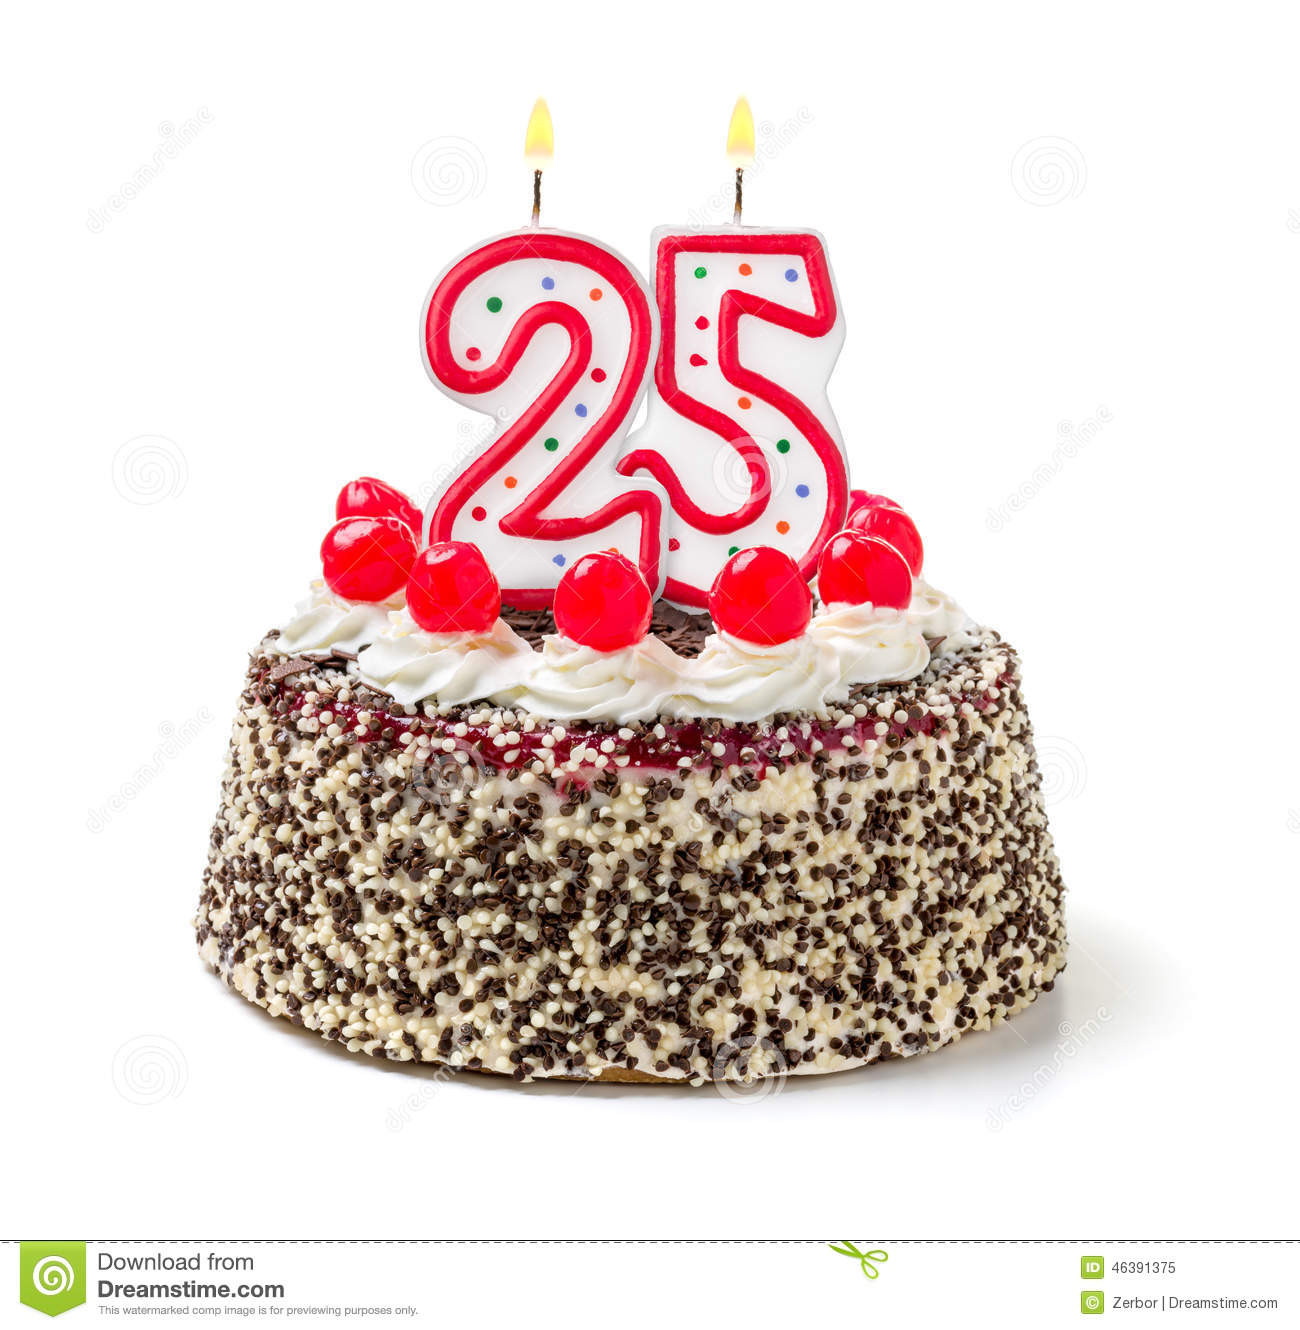 25 Birthday Cake
 Birthday Cake With Candle Number 25 Stock Image Image of